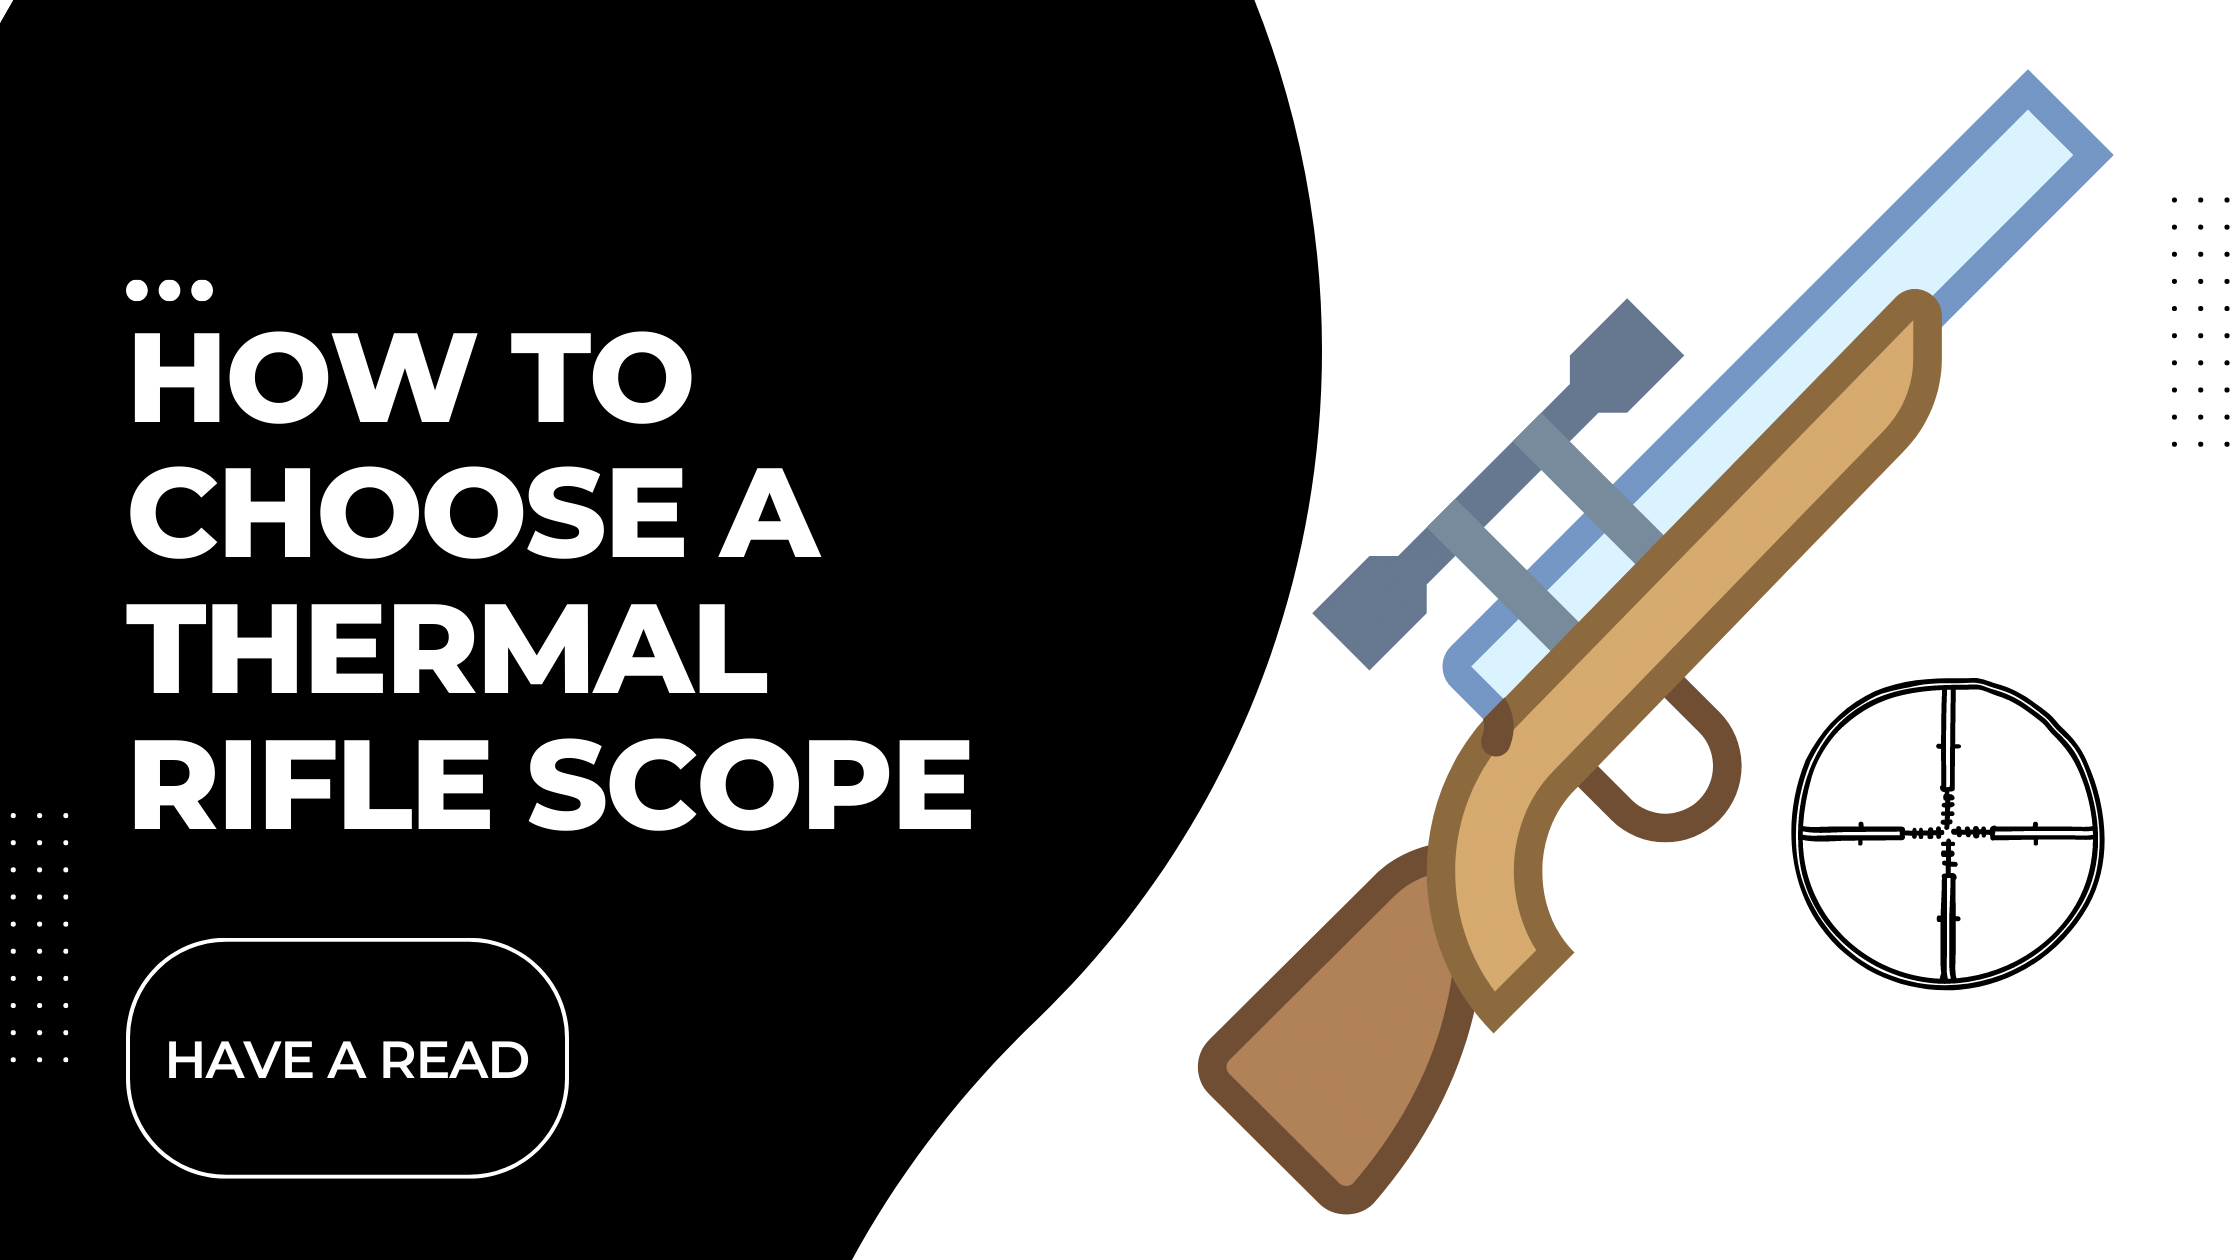 How to choose a thermal rifle scope